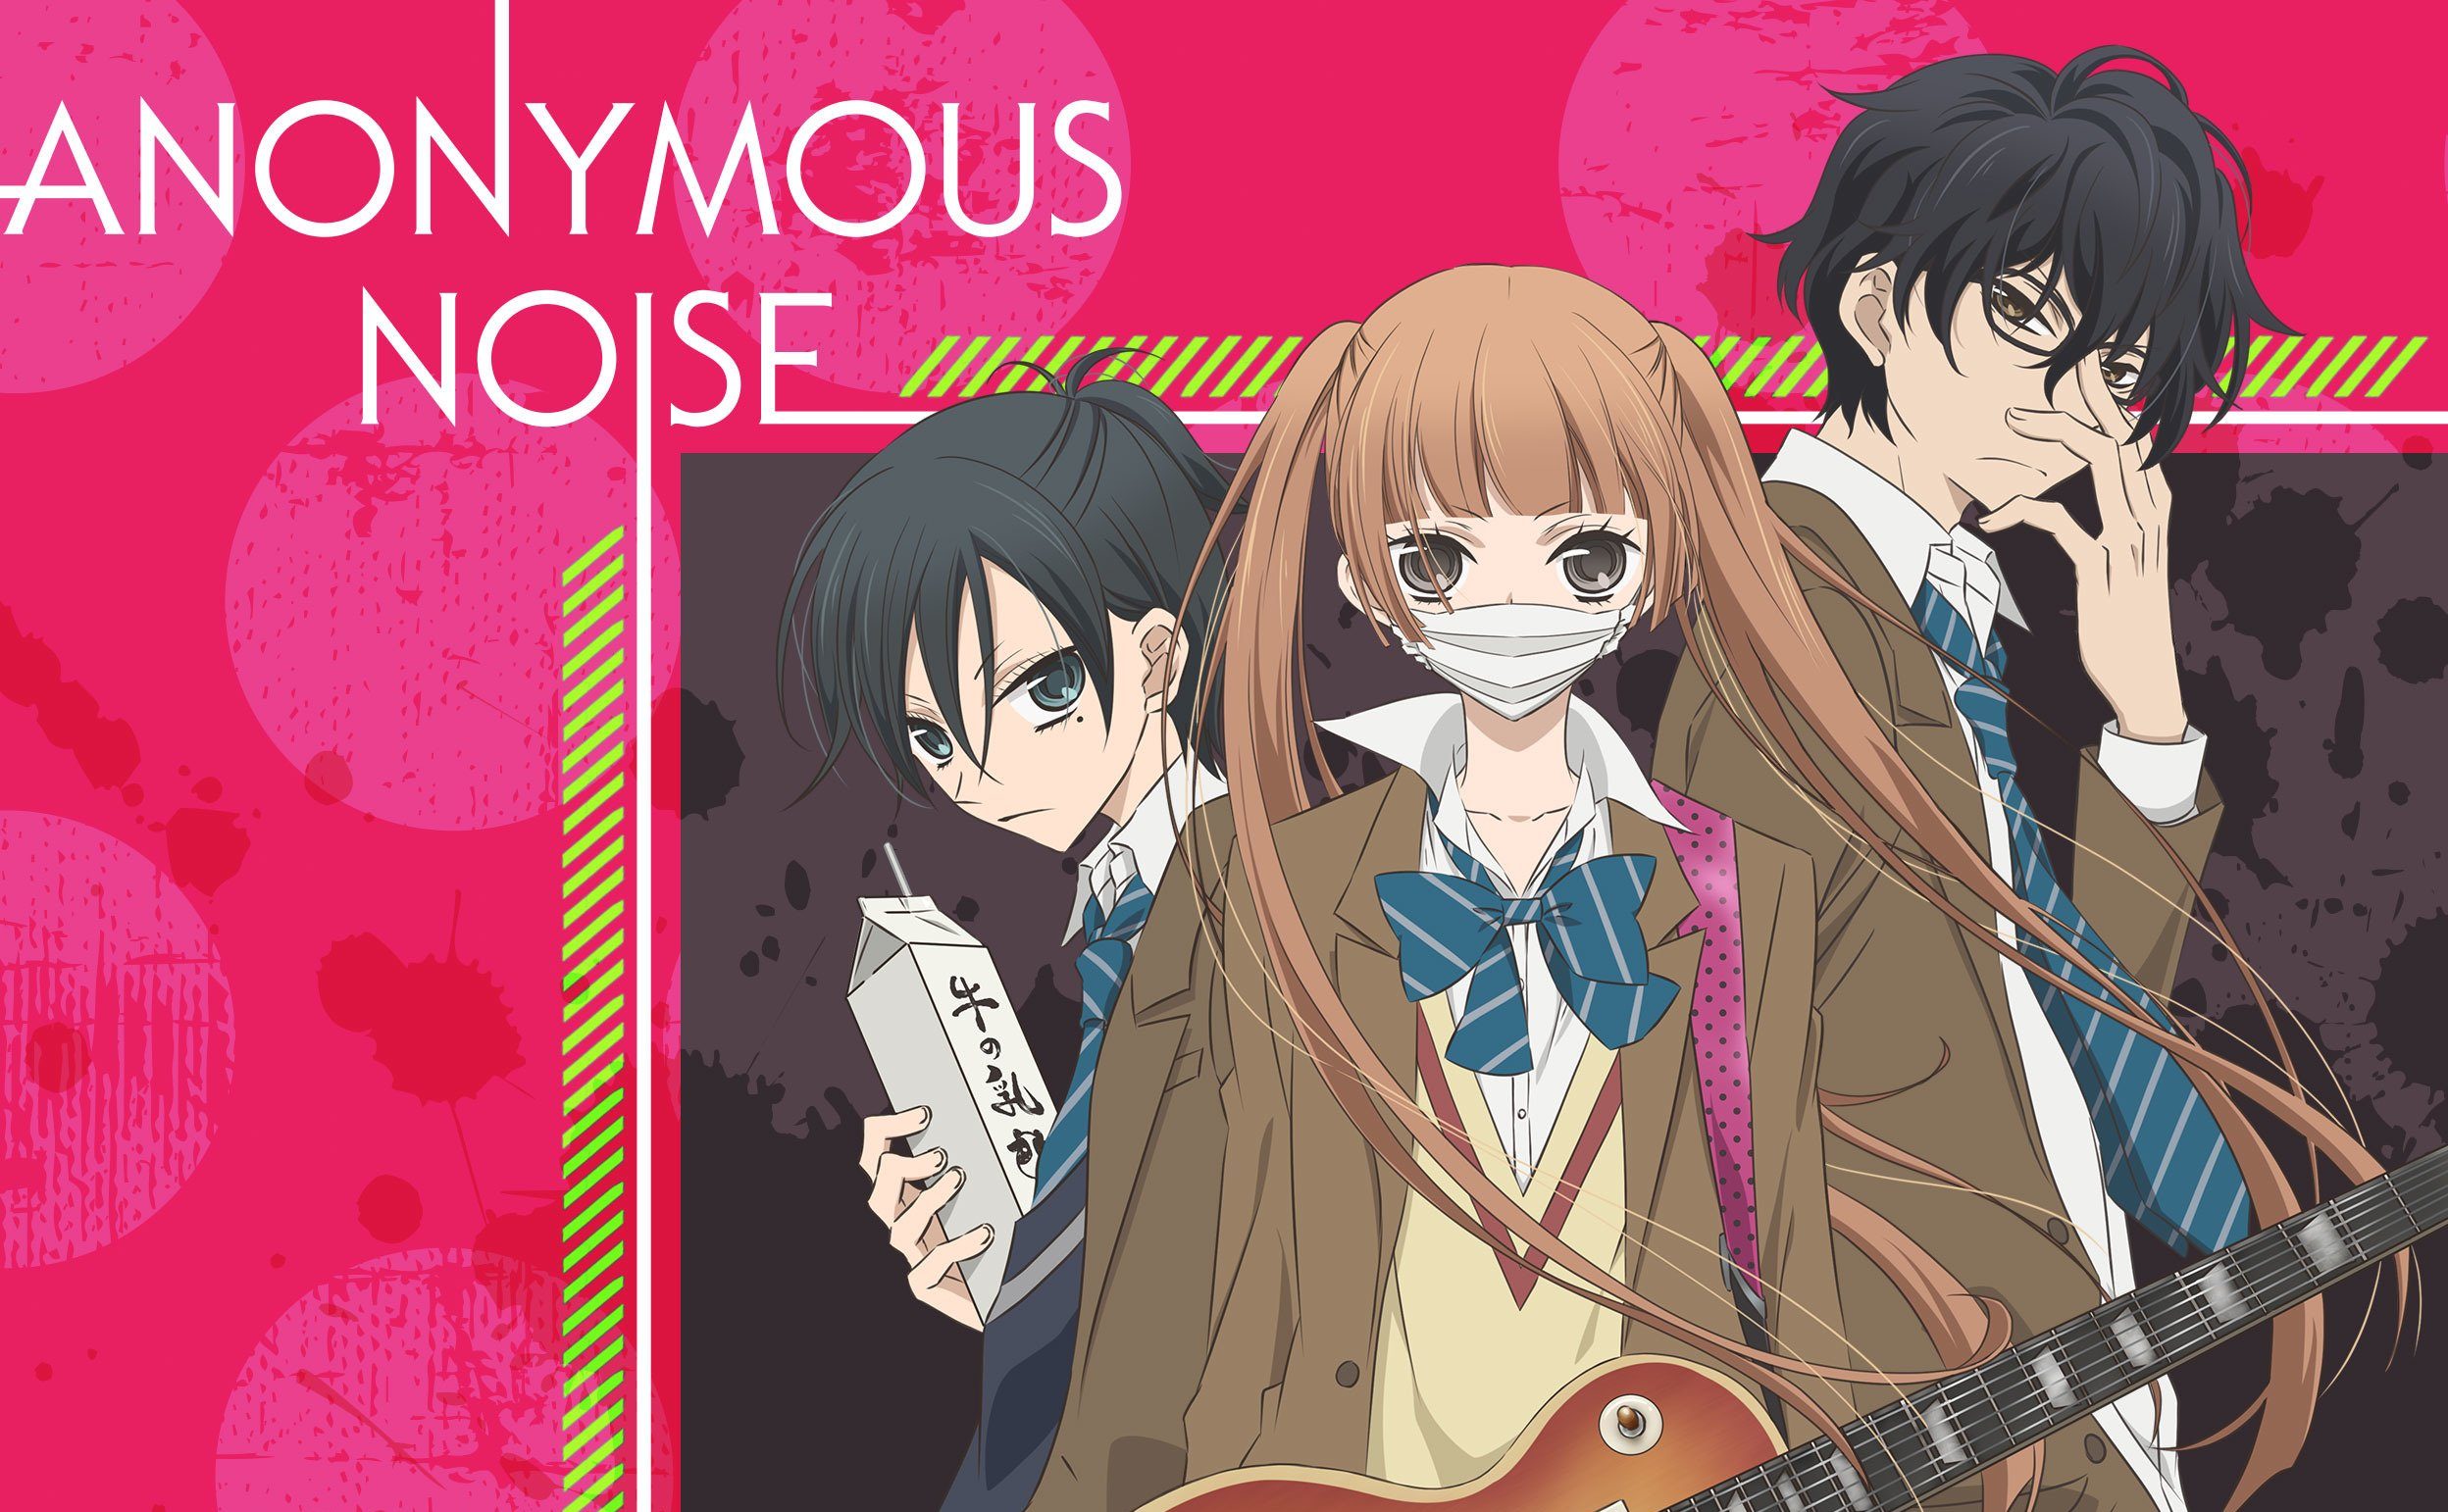 Anonymous Noise Vol 8  Book by Ryoko Fukuyama  Official Publisher Page   Simon  Schuster India